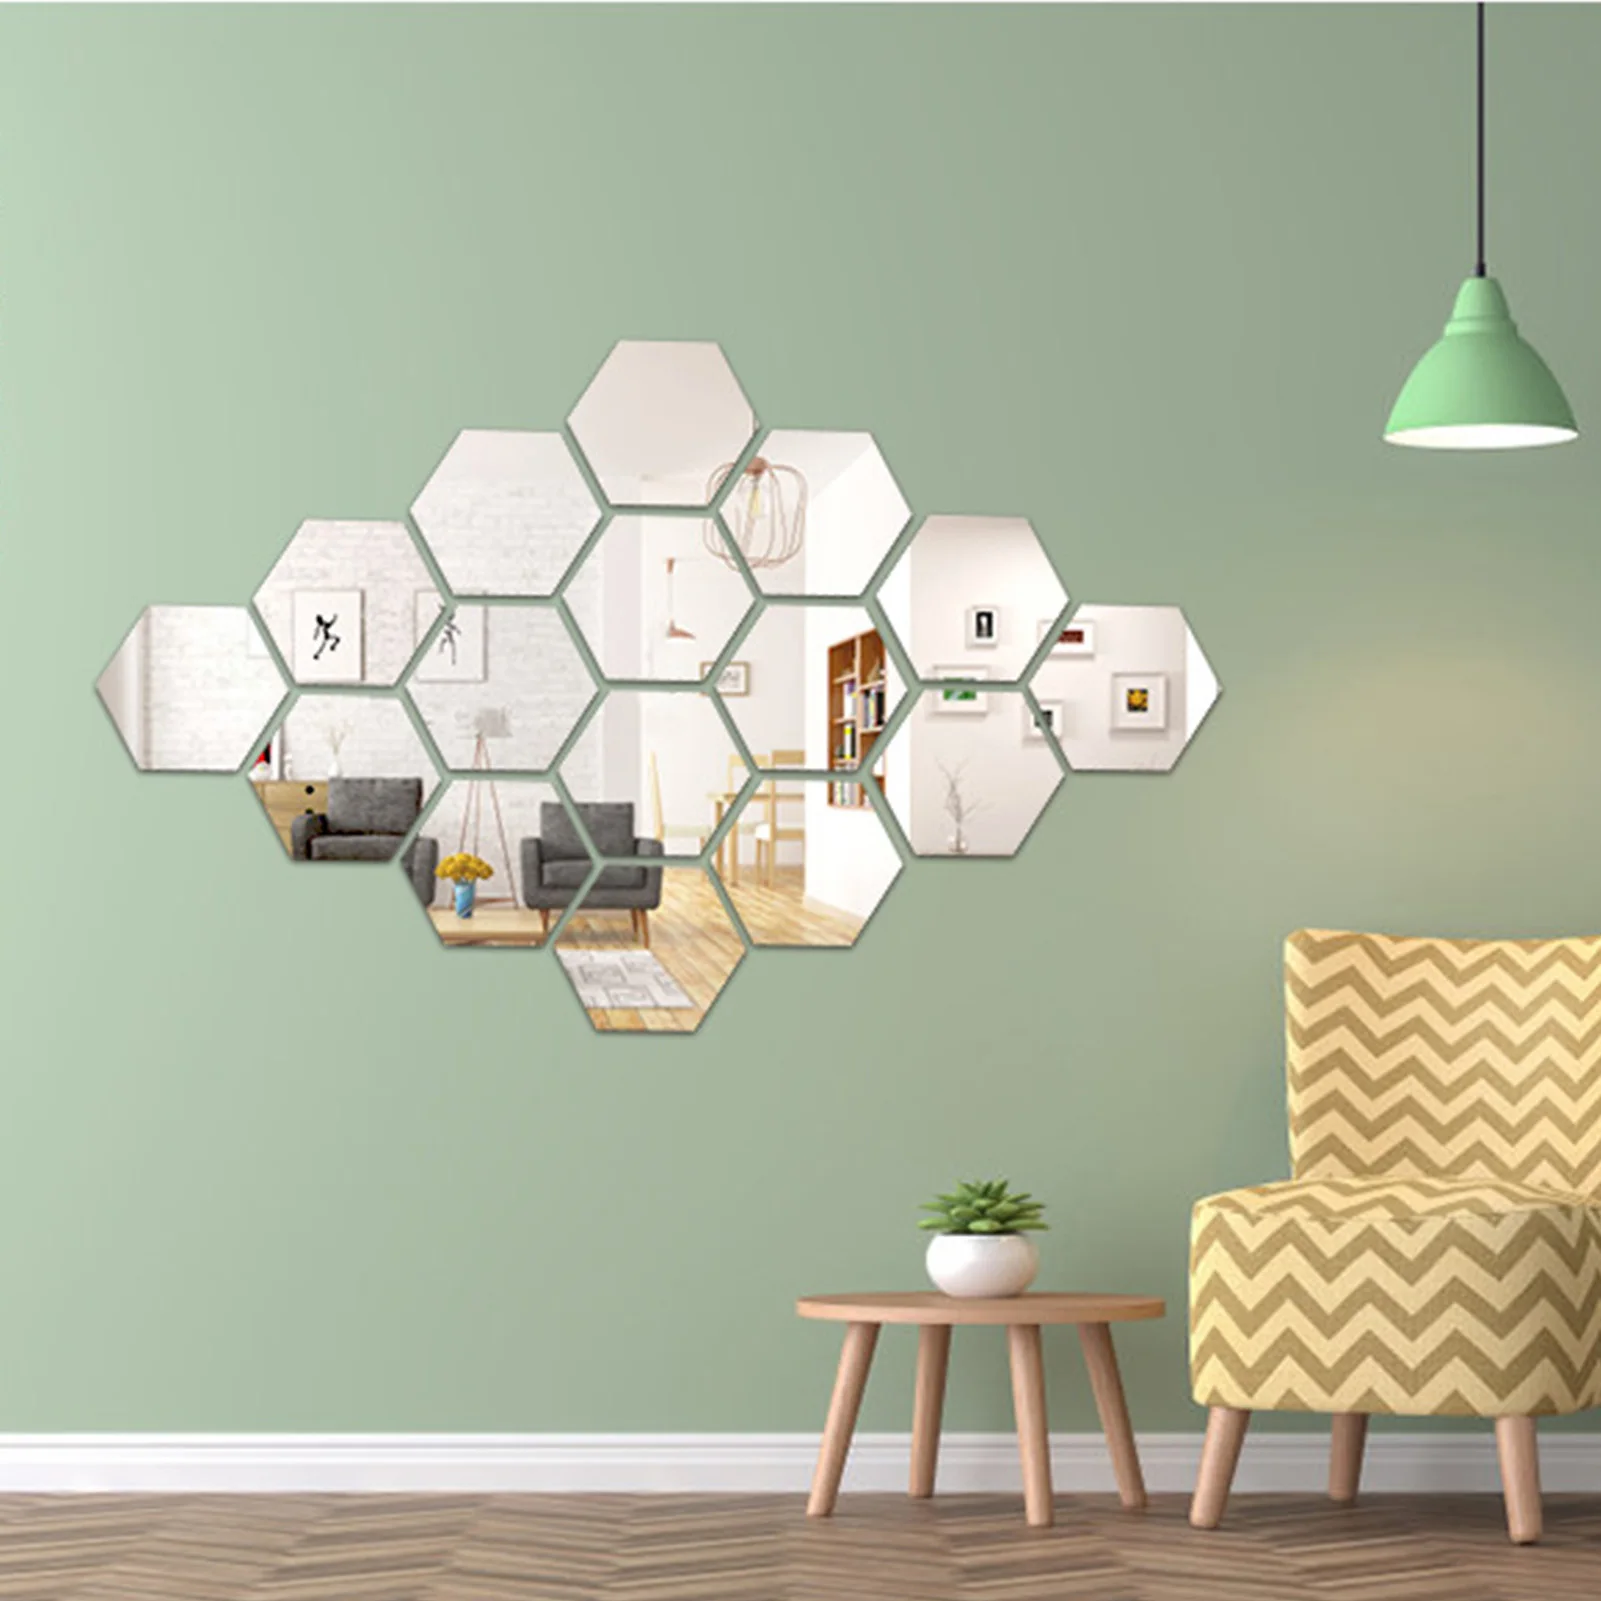 3D Wall Sticker Mirror Hexagon Acrylic Removable Home Art Decorate 